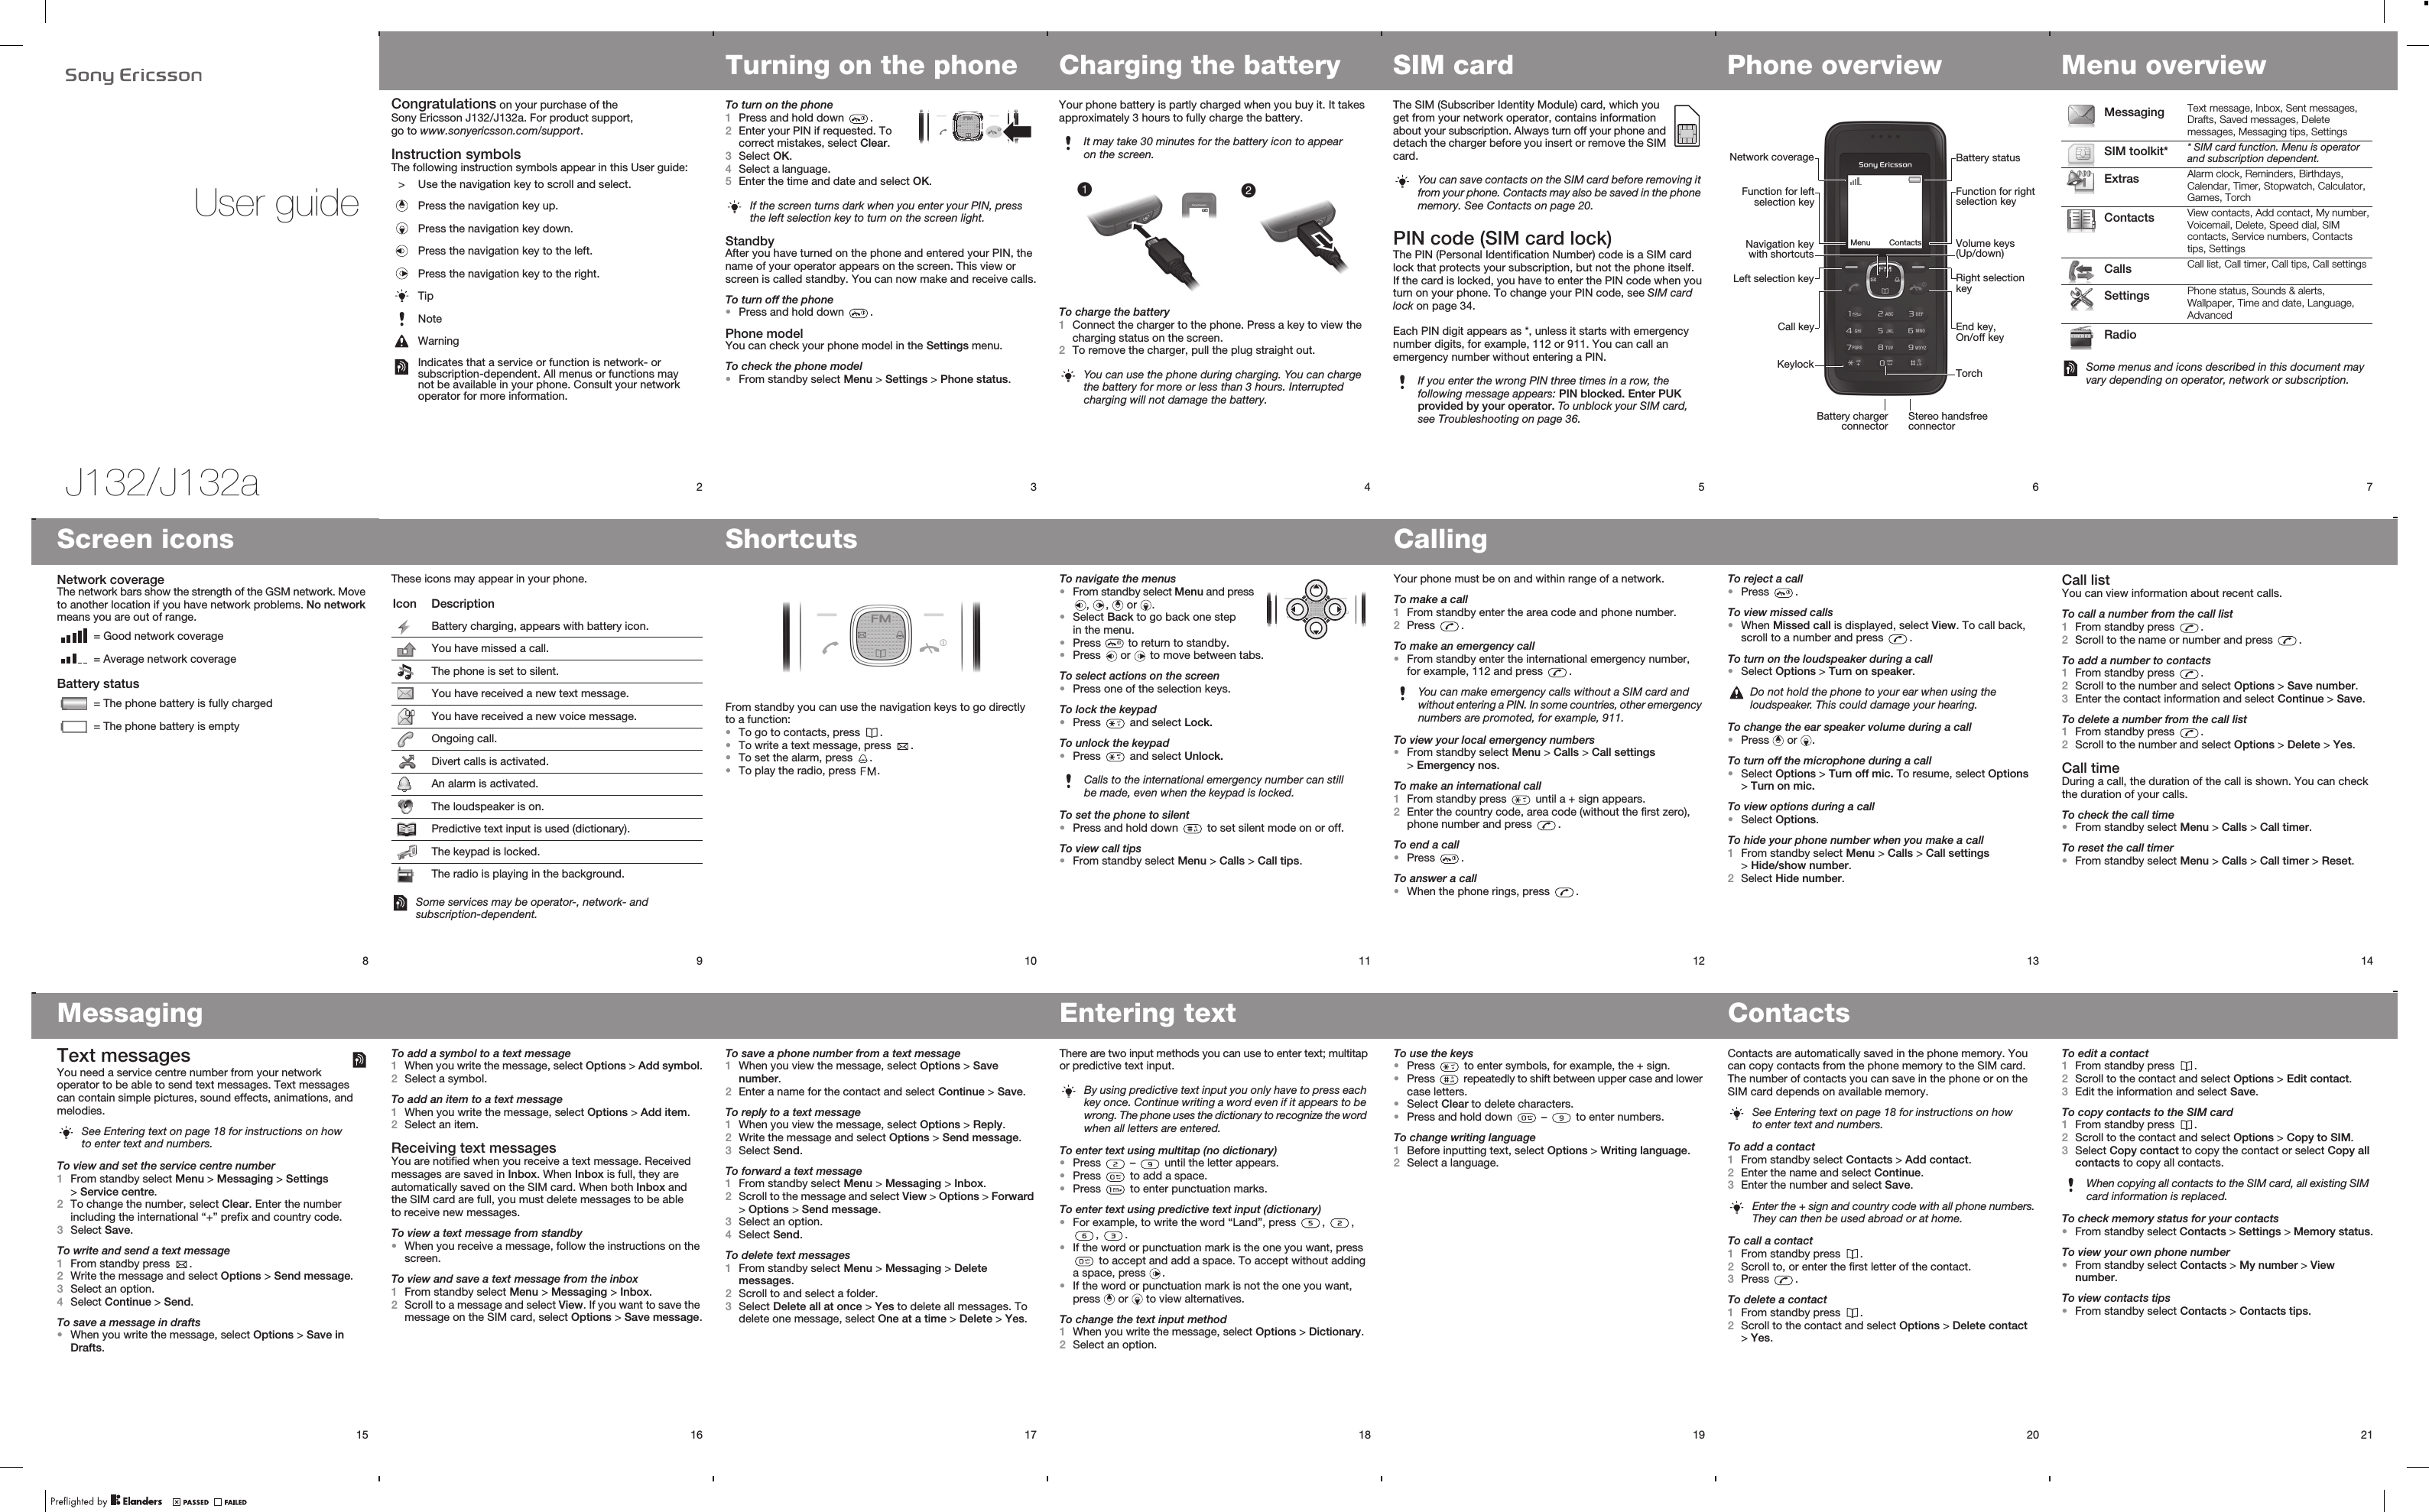 J132/J132aUser guide2Congratulations on your purchase of the Sony Ericsson J132/J132a. For product support, go to www.sonyericsson.com/support.Instruction symbolsThe following instruction symbols appear in this User guide:&gt; Use the navigation key to scroll and select. Press the navigation key up.Press the navigation key down.Press the navigation key to the left.Press the navigation key to the right.TipNoteWarningIndicates that a service or function is network- or subscription-dependent. All menus or functions may not be available in your phone. Consult your network operator for more information.3Turning on the phoneTo turn on the phone1Press and hold down  .2Enter your PIN if requested. To correct mistakes, select Clear.3Select OK.4Select a language.5Enter the time and date and select OK.StandbyAfter you have turned on the phone and entered your PIN, the name of your operator appears on the screen. This view or screen is called standby. You can now make and receive calls.To turn off the phone•Press and hold down  .Phone modelYou can check your phone model in the Settings menu.To check the phone model•From standby select Menu &gt; Settings &gt; Phone status.If the screen turns dark when you enter your PIN, press the left selection key to turn on the screen light.4Charging the batteryYour phone battery is partly charged when you buy it. It takes approximately 3 hours to fully charge the battery.To charge the battery1Connect the charger to the phone. Press a key to view the charging status on the screen.2To remove the charger, pull the plug straight out.It may take 30 minutes for the battery icon to appear on the screen.You can use the phone during charging. You can charge the battery for more or less than 3 hours. Interrupted charging will not damage the battery.5SIM cardThe SIM (Subscriber Identity Module) card, which you get from your network operator, contains information about your subscription. Always turn off your phone and detach the charger before you insert or remove the SIM card.PIN code (SIM card lock)The PIN (Personal Identification Number) code is a SIM card lock that protects your subscription, but not the phone itself. If the card is locked, you have to enter the PIN code when you turn on your phone. To change your PIN code, see SIM card lock on page 34.Each PIN digit appears as *, unless it starts with emergency number digits, for example, 112 or 911. You can call an emergency number without entering a PIN.You can save contacts on the SIM card before removing it from your phone. Contacts may also be saved in the phone memory. See Contacts on page 20.If you enter the wrong PIN three times in a row, the following message appears: PIN blocked. Enter PUK provided by your operator. To unblock your SIM card, see Troubleshooting on page 36.6Phone overviewCall keyNavigation keywith shortcutsStereo handsfree connectorLeft selection keyBattery chargerconnectorNetwork coverageFunction for leftselection keyMenu ContactsKeylockEnd key, On/off keyVolume keys (Up/down)Right selection keyBattery statusFunction for right selection keyTorch7Menu overview Messaging Text message, Inbox, Sent messages, Drafts, Saved messages, Delete messages, Messaging tips, Settings SIM toolkit* * SIM card function. Menu is operator and subscription dependent. Extras Alarm clock, Reminders, Birthdays, Calendar, Timer, Stopwatch, Calculator, Games, Torch Contacts View contacts, Add contact, My number, Voicemail, Delete, Speed dial, SIM contacts, Service numbers, Contacts tips, Settings Calls Call list, Call timer, Call tips, Call settings Settings Phone status, Sounds &amp; alerts, Wallpaper, Time and date, Language, Advanced RadioSome menus and icons described in this document may vary depending on operator, network or subscription.14Call listYou can view information about recent calls.To call a number from the call list1From standby press  .2Scroll to the name or number and press  .To add a number to contacts1From standby press  .2Scroll to the number and select Options &gt; Save number.3Enter the contact information and select Continue &gt; Save.To delete a number from the call list1From standby press  .2Scroll to the number and select Options &gt; Delete &gt; Yes.Call timeDuring a call, the duration of the call is shown. You can check the duration of your calls.To check the call time•From standby select Menu &gt; Calls &gt; Call timer.To reset the call timer•From standby select Menu &gt; Calls &gt; Call timer &gt; Reset.13To reject a call•Press  .To view missed calls•When Missed call is displayed, select View. To call back, scroll to a number and press  .To turn on the loudspeaker during a call•Select Options &gt; Turn on speaker.To change the ear speaker volume during a call•Press   or  .To turn off the microphone during a call•Select Options &gt; Turn off mic. To resume, select Options &gt; Turn on mic.To view options during a call•Select Options.To hide your phone number when you make a call1From standby select Menu &gt; Calls &gt; Call settings &gt; Hide/show number.2Select Hide number.Do not hold the phone to your ear when using the loudspeaker. This could damage your hearing.12CallingYour phone must be on and within range of a network.To make a call1From standby enter the area code and phone number.2Press  .To make an emergency call•From standby enter the international emergency number, for example, 112 and press  .To view your local emergency numbers•From standby select Menu &gt; Calls &gt; Call settings &gt; Emergency nos.To make an international call1From standby press   until a + sign appears.2Enter the country code, area code (without the first zero), phone number and press  .To end a call•Press  .To answer a call•When the phone rings, press  .You can make emergency calls without a SIM card and without entering a PIN. In some countries, other emergency numbers are promoted, for example, 911.11To navigate the menus•From standby select Menu and press ,  ,   or  .•Select Back to go back one step in the menu.•Press   to return to standby.•Press   or   to move between tabs.To select actions on the screen•Press one of the selection keys.To lock the keypad•Press   and select Lock.To unlock the keypad•Press   and select Unlock.To set the phone to silent•Press and hold down   to set silent mode on or off.To view call tips•From standby select Menu &gt; Calls &gt; Call tips.Calls to the international emergency number can still be made, even when the keypad is locked.9These icons may appear in your phone.Icon DescriptionBattery charging, appears with battery icon.You have missed a call.The phone is set to silent.You have received a new text message.You have received a new voice message.Ongoing call.Divert calls is activated.An alarm is activated.The loudspeaker is on.Predictive text input is used (dictionary).The keypad is locked.The radio is playing in the background.Some services may be operator-, network- and subscription-dependent.8Screen iconsNetwork coverageThe network bars show the strength of the GSM network. Move to another location if you have network problems. No network means you are out of range.Battery status = Good network coverage = Average network coverage = The phone battery is fully charged = The phone battery is empty10ShortcutsFrom standby you can use the navigation keys to go directly to a function:•To go to contacts, press  .•To write a text message, press  .•To set the alarm, press  .•To play the radio, press  .15MessagingText messagesYou need a service centre number from your network operator to be able to send text messages. Text messages can contain simple pictures, sound effects, animations, and melodies.To view and set the service centre number1From standby select Menu &gt; Messaging &gt; Settings &gt; Service centre.2To change the number, select Clear. Enter the number including the international “+” prefix and country code. 3Select Save.To write and send a text message1From standby press  .2Write the message and select Options &gt; Send message.3Select an option.4Select Continue &gt; Send.To save a message in drafts•When you write the message, select Options &gt; Save in Drafts.See Entering text on page 18 for instructions on how to enter text and numbers.16To add a symbol to a text message1When you write the message, select Options &gt; Add symbol.2Select a symbol.To add an item to a text message1When you write the message, select Options &gt; Add item.2Select an item.Receiving text messagesYou are notified when you receive a text message. Received messages are saved in Inbox. When Inbox is full, they are automatically saved on the SIM card. When both Inbox and the SIM card are full, you must delete messages to be able to receive new messages.To view a text message from standby•When you receive a message, follow the instructions on the screen.To view and save a text message from the inbox1From standby select Menu &gt; Messaging &gt; Inbox.2Scroll to a message and select View. If you want to save the message on the SIM card, select Options &gt; Save message.17To save a phone number from a text message1When you view the message, select Options &gt; Save number.2Enter a name for the contact and select Continue &gt; Save.To reply to a text message1When you view the message, select Options &gt; Reply.2Write the message and select Options &gt; Send message.3Select Send.To forward a text message1From standby select Menu &gt; Messaging &gt; Inbox.2Scroll to the message and select View &gt; Options &gt; Forward &gt; Options &gt; Send message.3Select an option.4Select Send.To delete text messages1From standby select Menu &gt; Messaging &gt; Delete messages.2Scroll to and select a folder.3Select Delete all at once &gt; Yes to delete all messages. To delete one message, select One at a time &gt; Delete &gt; Yes.18Entering textThere are two input methods you can use to enter text; multitap or predictive text input.To enter text using multitap (no dictionary)•Press   –   until the letter appears.•Press   to add a space.•Press   to enter punctuation marks.To enter text using predictive text input (dictionary)•For example, to write the word “Land”, press  ,  , ,  .•If the word or punctuation mark is the one you want, press  to accept and add a space. To accept without adding a space, press  . •If the word or punctuation mark is not the one you want, press   or   to view alternatives.To change the text input method1When you write the message, select Options &gt; Dictionary.2Select an option.By using predictive text input you only have to press each key once. Continue writing a word even if it appears to be wrong. The phone uses the dictionary to recognize the word when all letters are entered.19To use the keys•Press   to enter symbols, for example, the + sign.•Press   repeatedly to shift between upper case and lower case letters.•Select Clear to delete characters.•Press and hold down   –   to enter numbers.To change writing language1Before inputting text, select Options &gt; Writing language.2Select a language.20ContactsContacts are automatically saved in the phone memory. You can copy contacts from the phone memory to the SIM card. The number of contacts you can save in the phone or on the SIM card depends on available memory. To add a contact1From standby select Contacts &gt; Add contact.2Enter the name and select Continue.3Enter the number and select Save.To call a contact1From standby press  .2Scroll to, or enter the first letter of the contact.3Press  .To delete a contact1From standby press  .2Scroll to the contact and select Options &gt; Delete contact &gt; Yes.See Entering text on page 18 for instructions on how to enter text and numbers.Enter the + sign and country code with all phone numbers. They can then be used abroad or at home.21To edit a contact1From standby press  .2Scroll to the contact and select Options &gt; Edit contact.3Edit the information and select Save.To copy contacts to the SIM card1From standby press  .2Scroll to the contact and select Options &gt; Copy to SIM.3Select Copy contact to copy the contact or select Copy all contacts to copy all contacts.To check memory status for your contacts•From standby select Contacts &gt; Settings &gt; Memory status.To view your own phone number•From standby select Contacts &gt; My number &gt; View number.To view contacts tips•From standby select Contacts &gt; Contacts tips.When copying all contacts to the SIM card, all existing SIM card information is replaced.